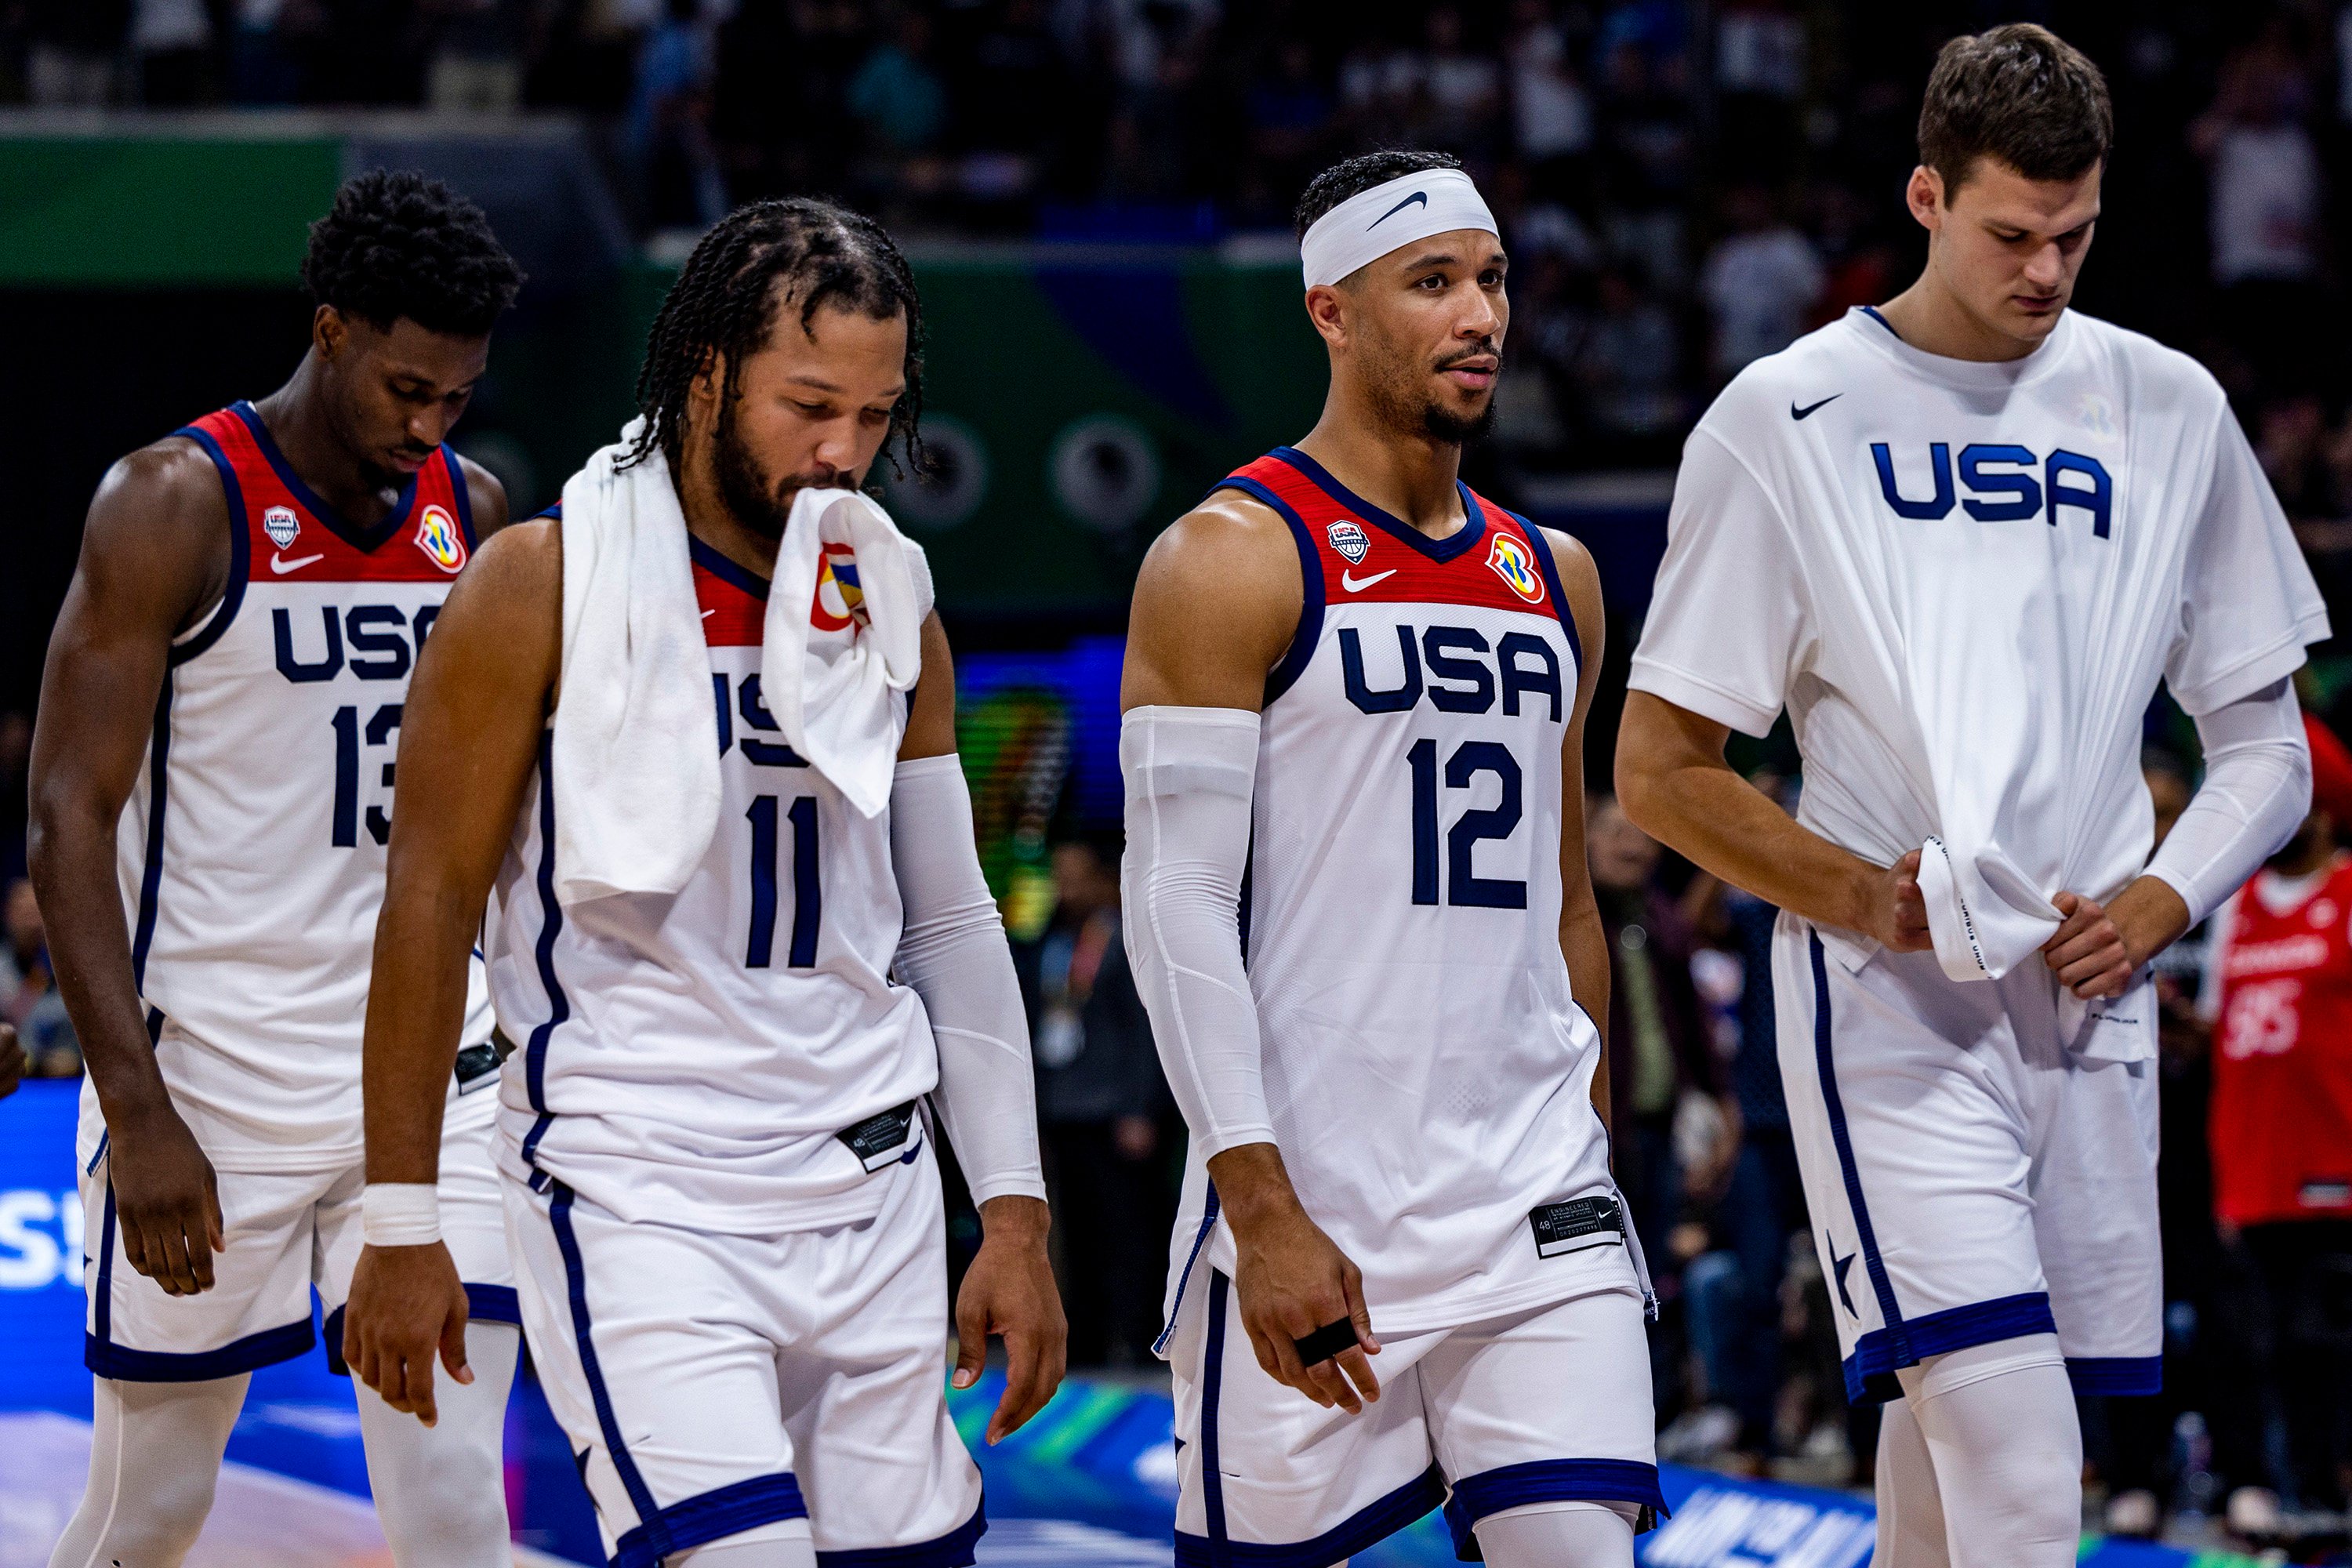 Team USA leave the court after losing to Germany in the FIBA Basketball World Cup semifinals at Mall of Asia Arena. Photo: TNS